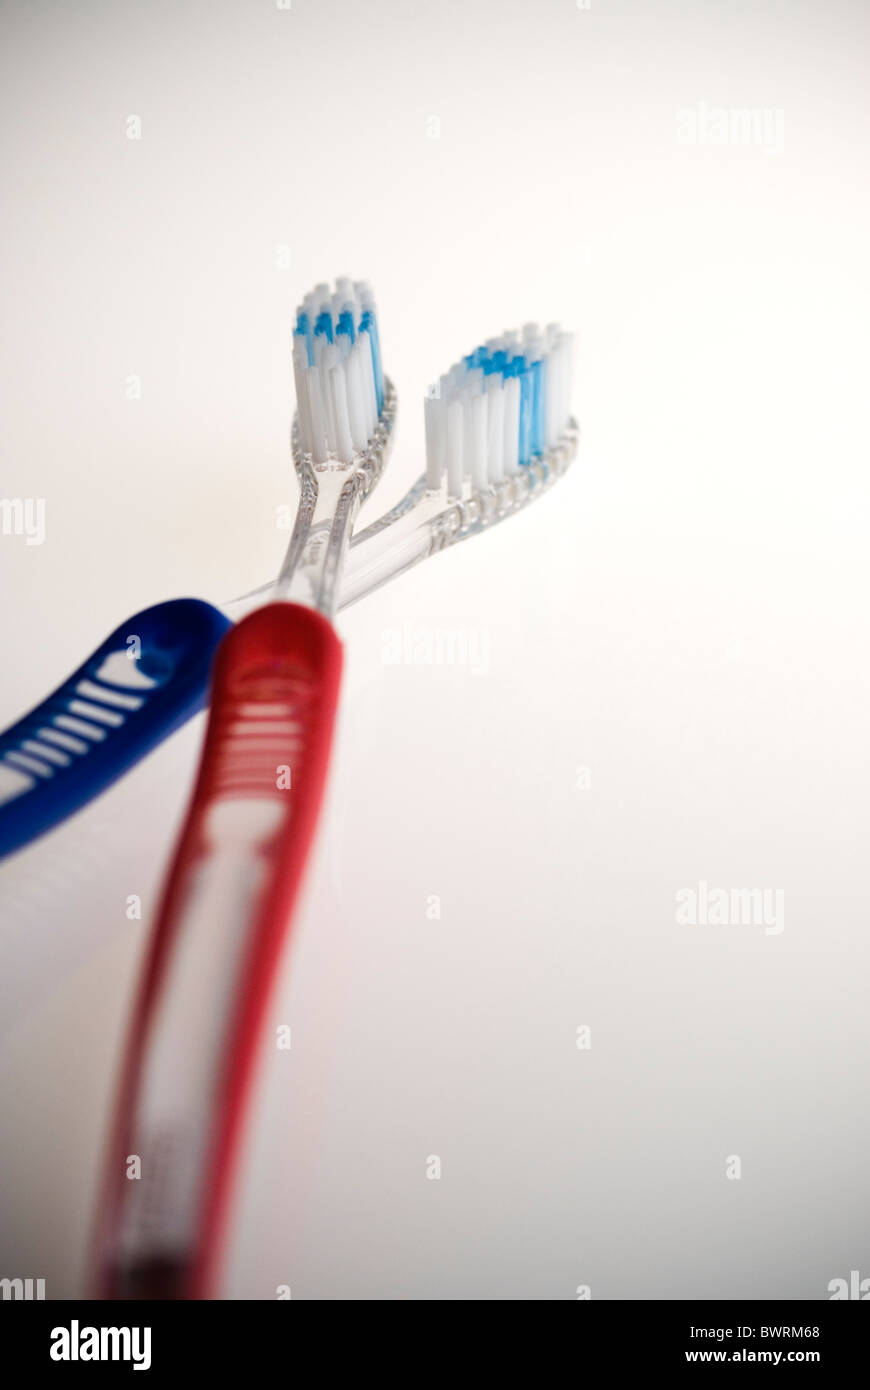 A pair of toothbrushes - togetherness. Stock Photo